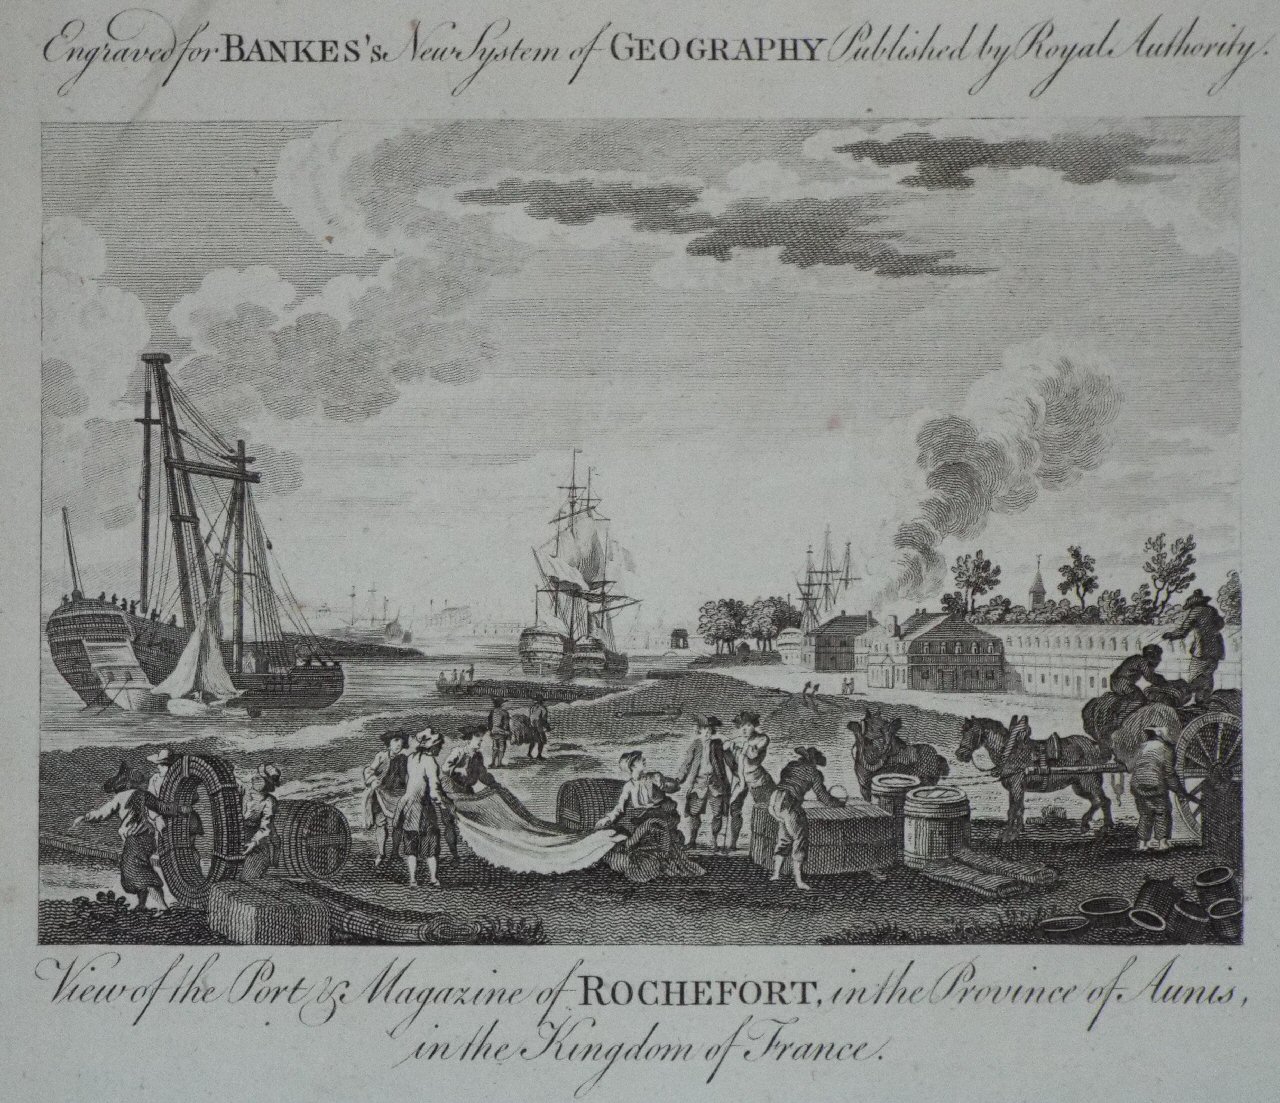 Print - View of the Port & Magazine of Rochefort, in the Province of Aunis, in the Kingdom of France.